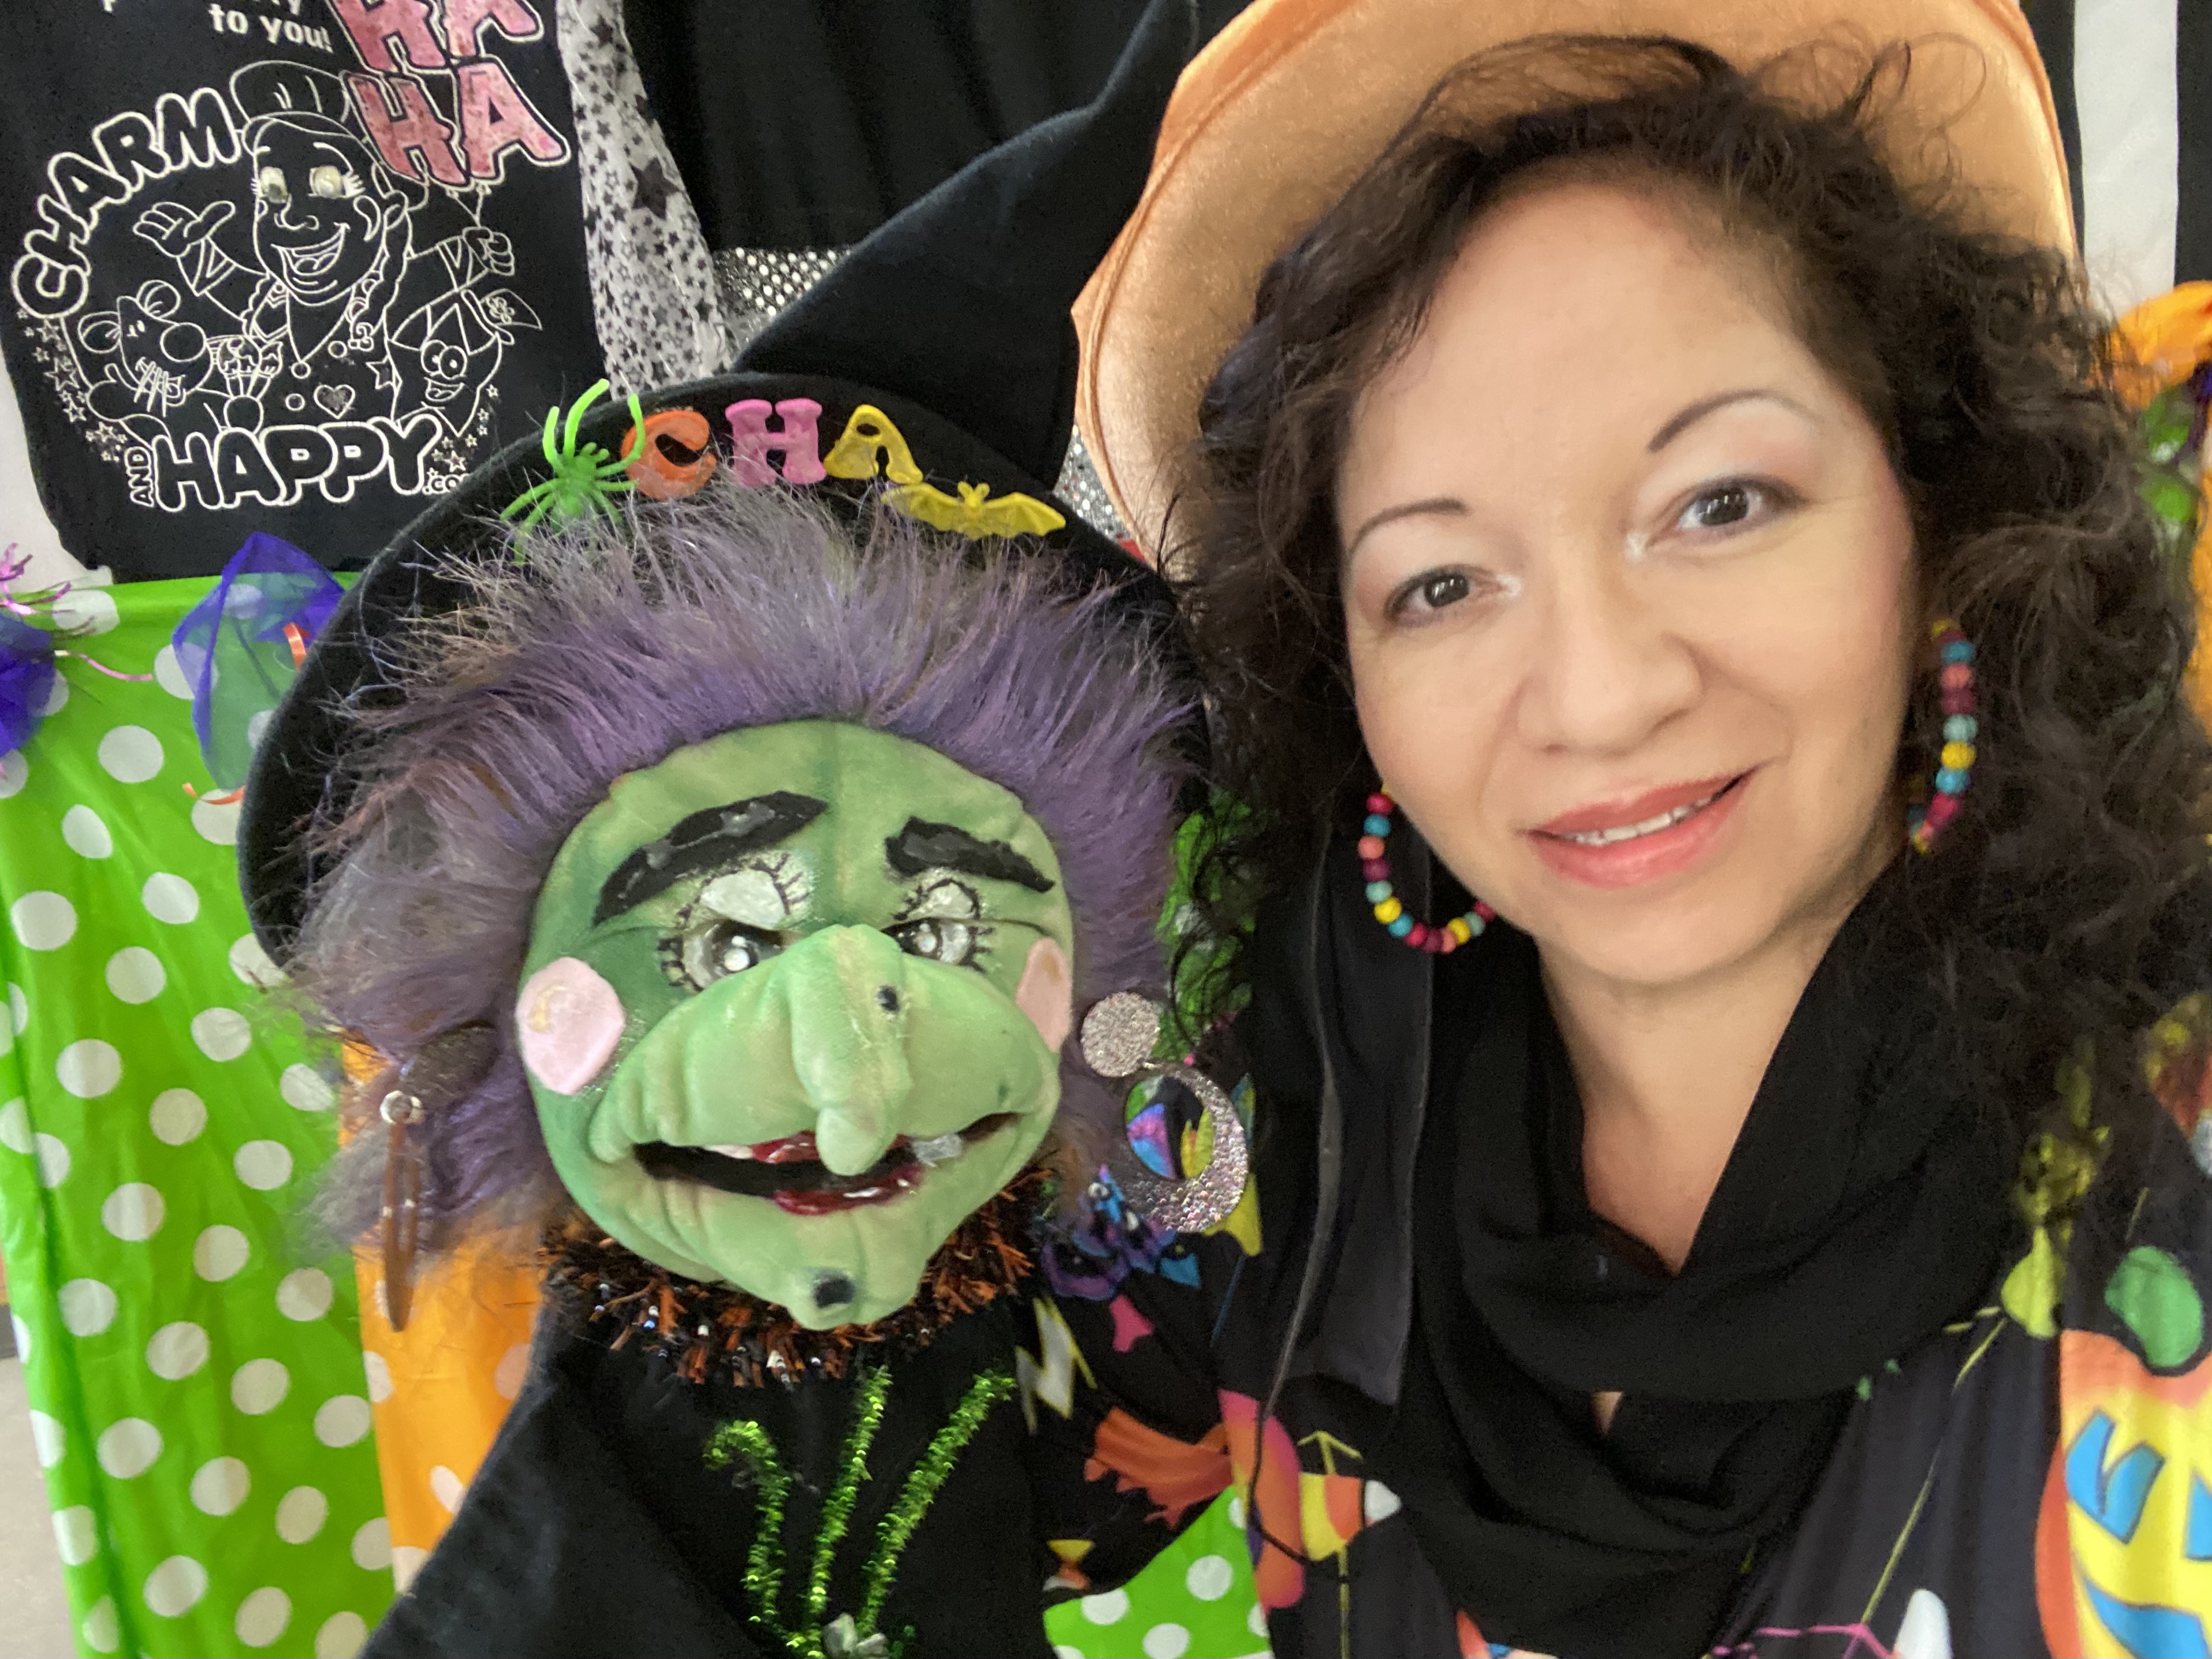 Halloween puppet show featuring Witch Cha and Carmen of CharmandHappy.com